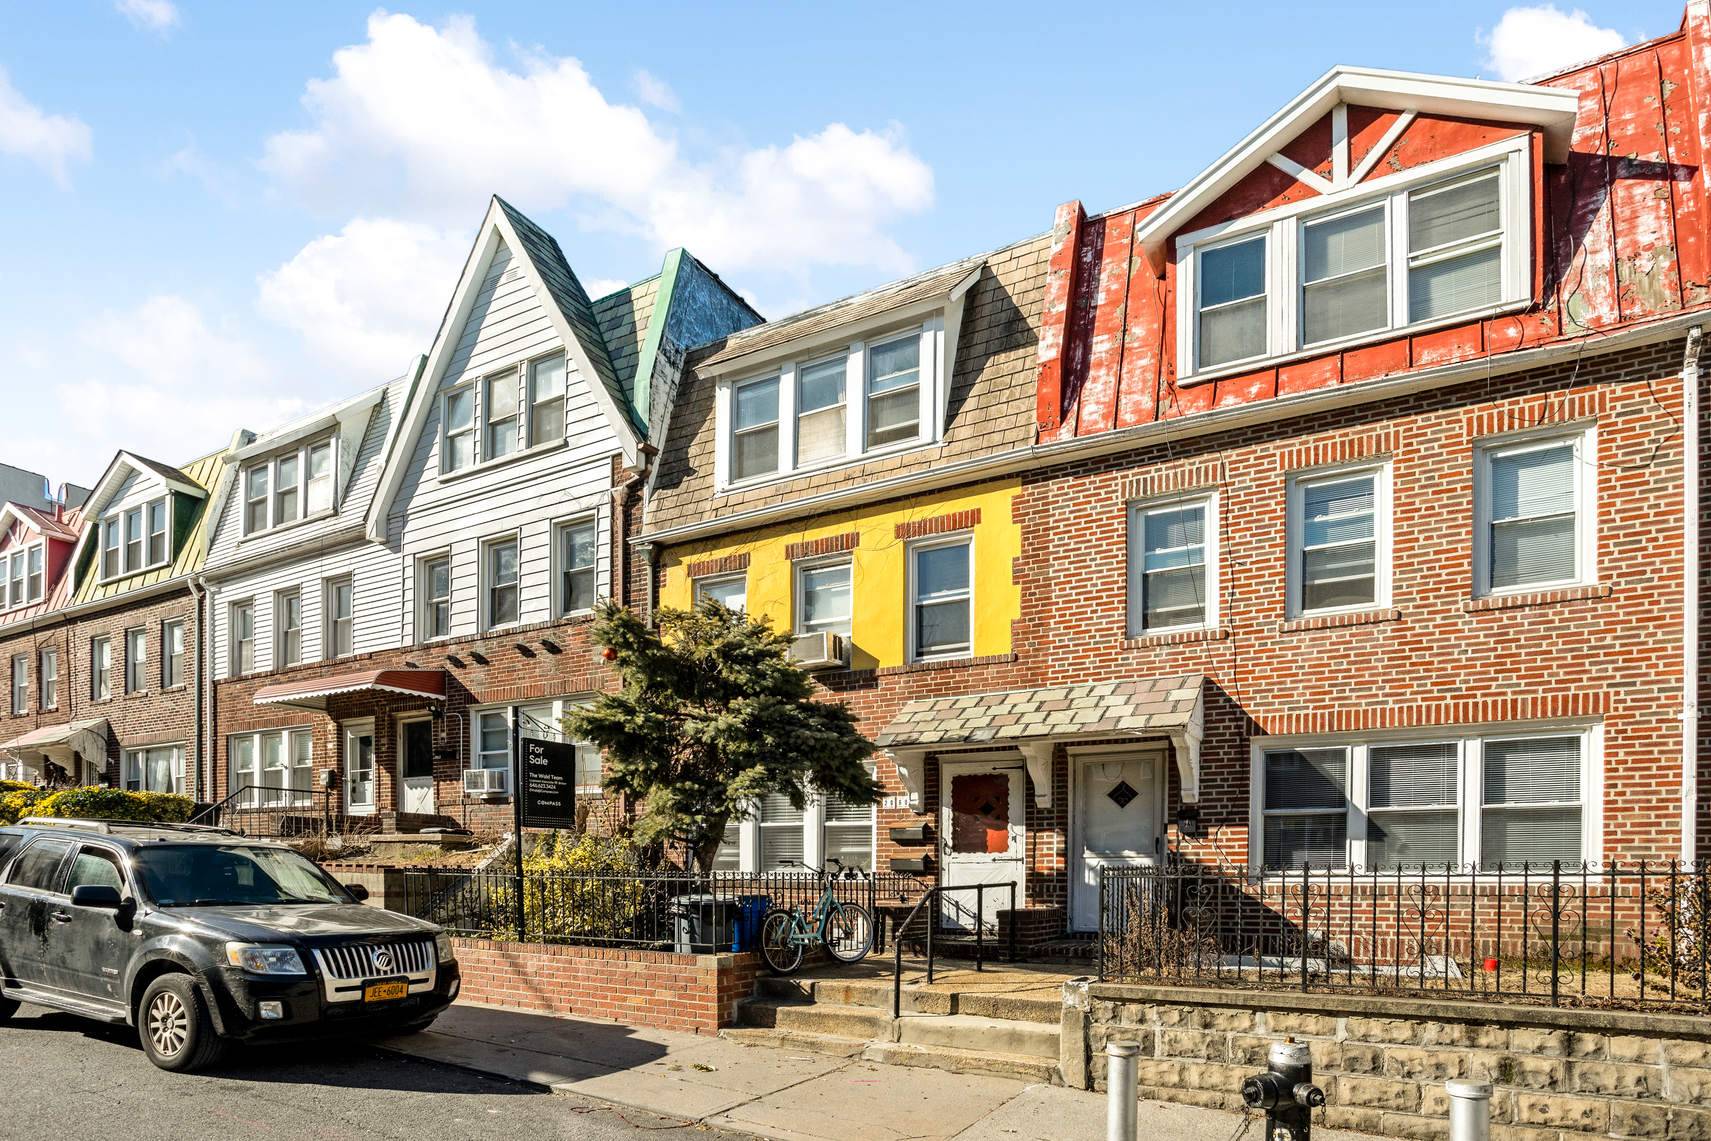 Fantastic 2 Family townhouse with finished basement and backyard in Astoria.